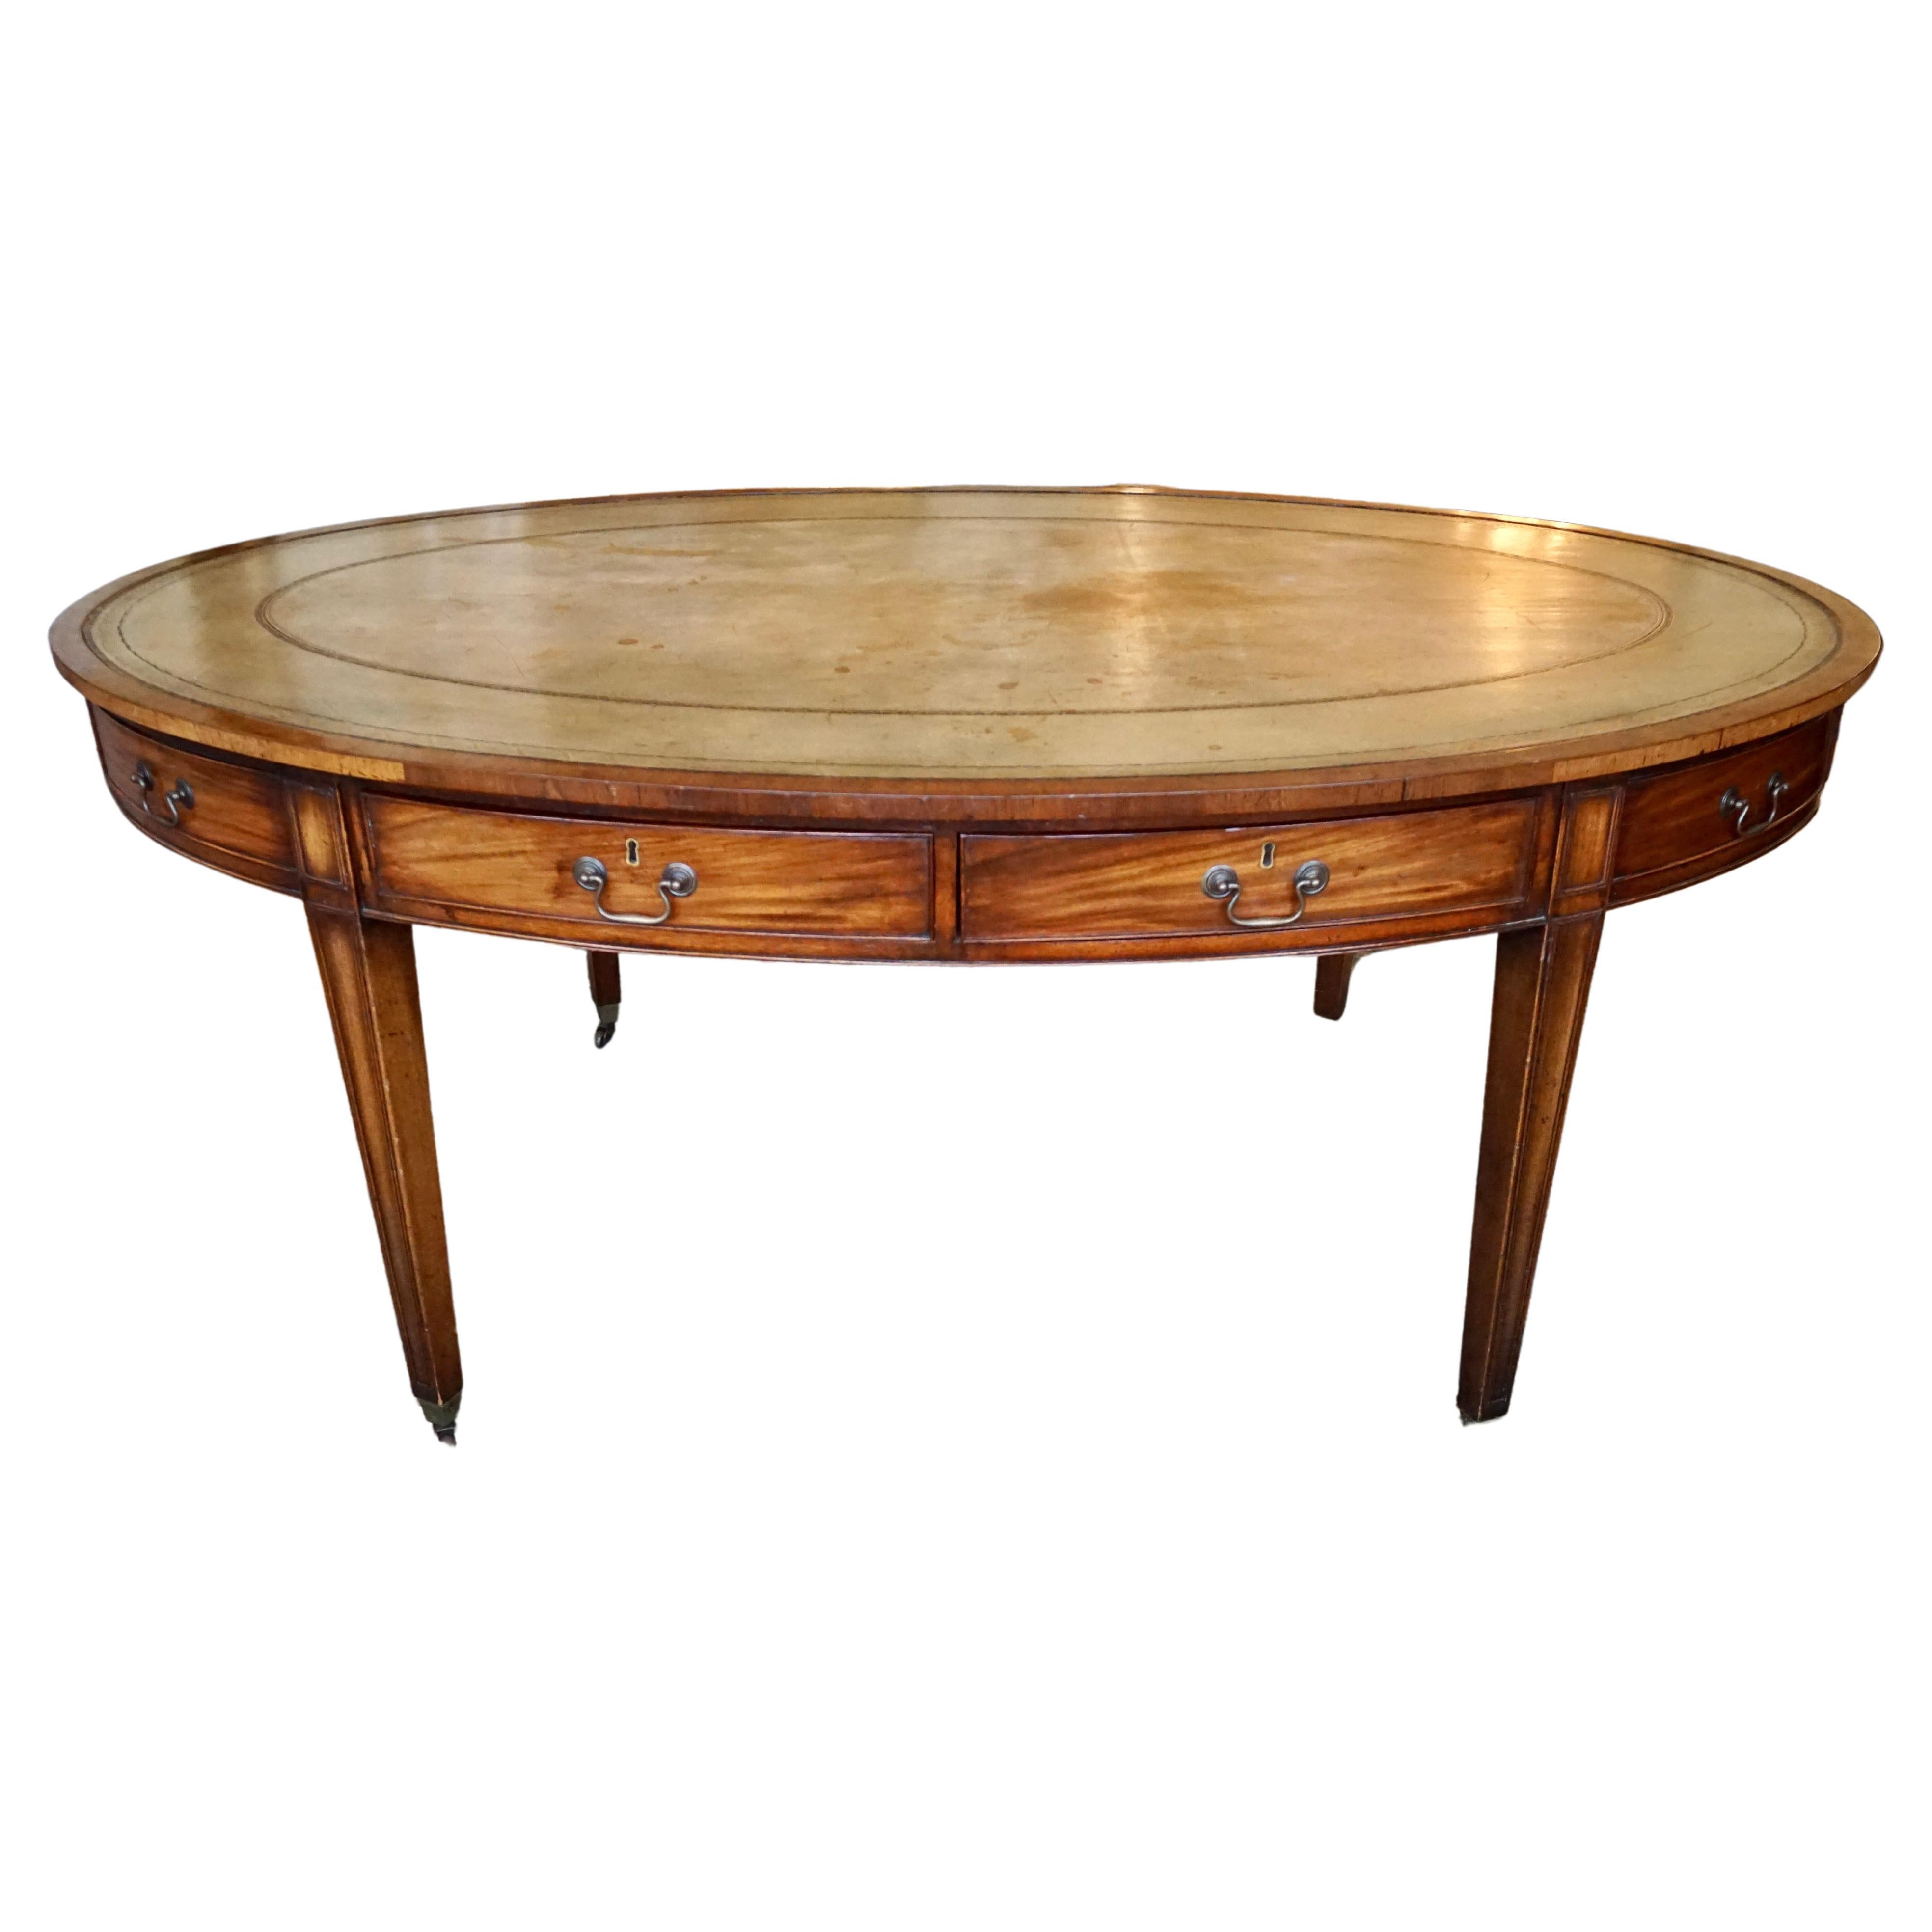 English Hepplewhite Style Mahogany Oval Writing Table with Leather Top For Sale